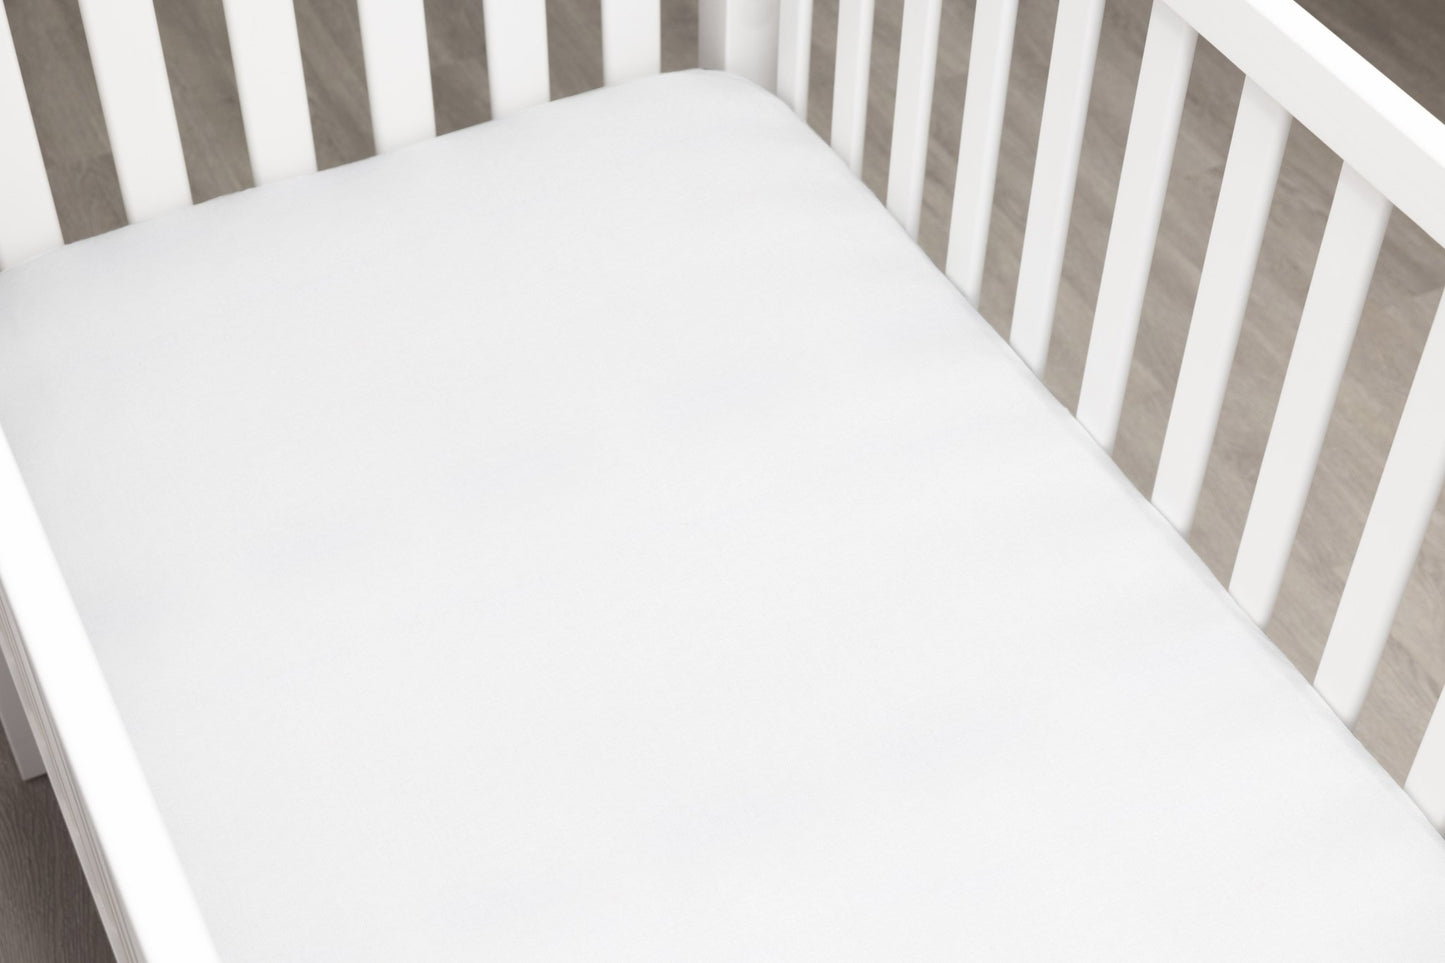 Solid White Minky Crib Sheet - New Arrivals Inc